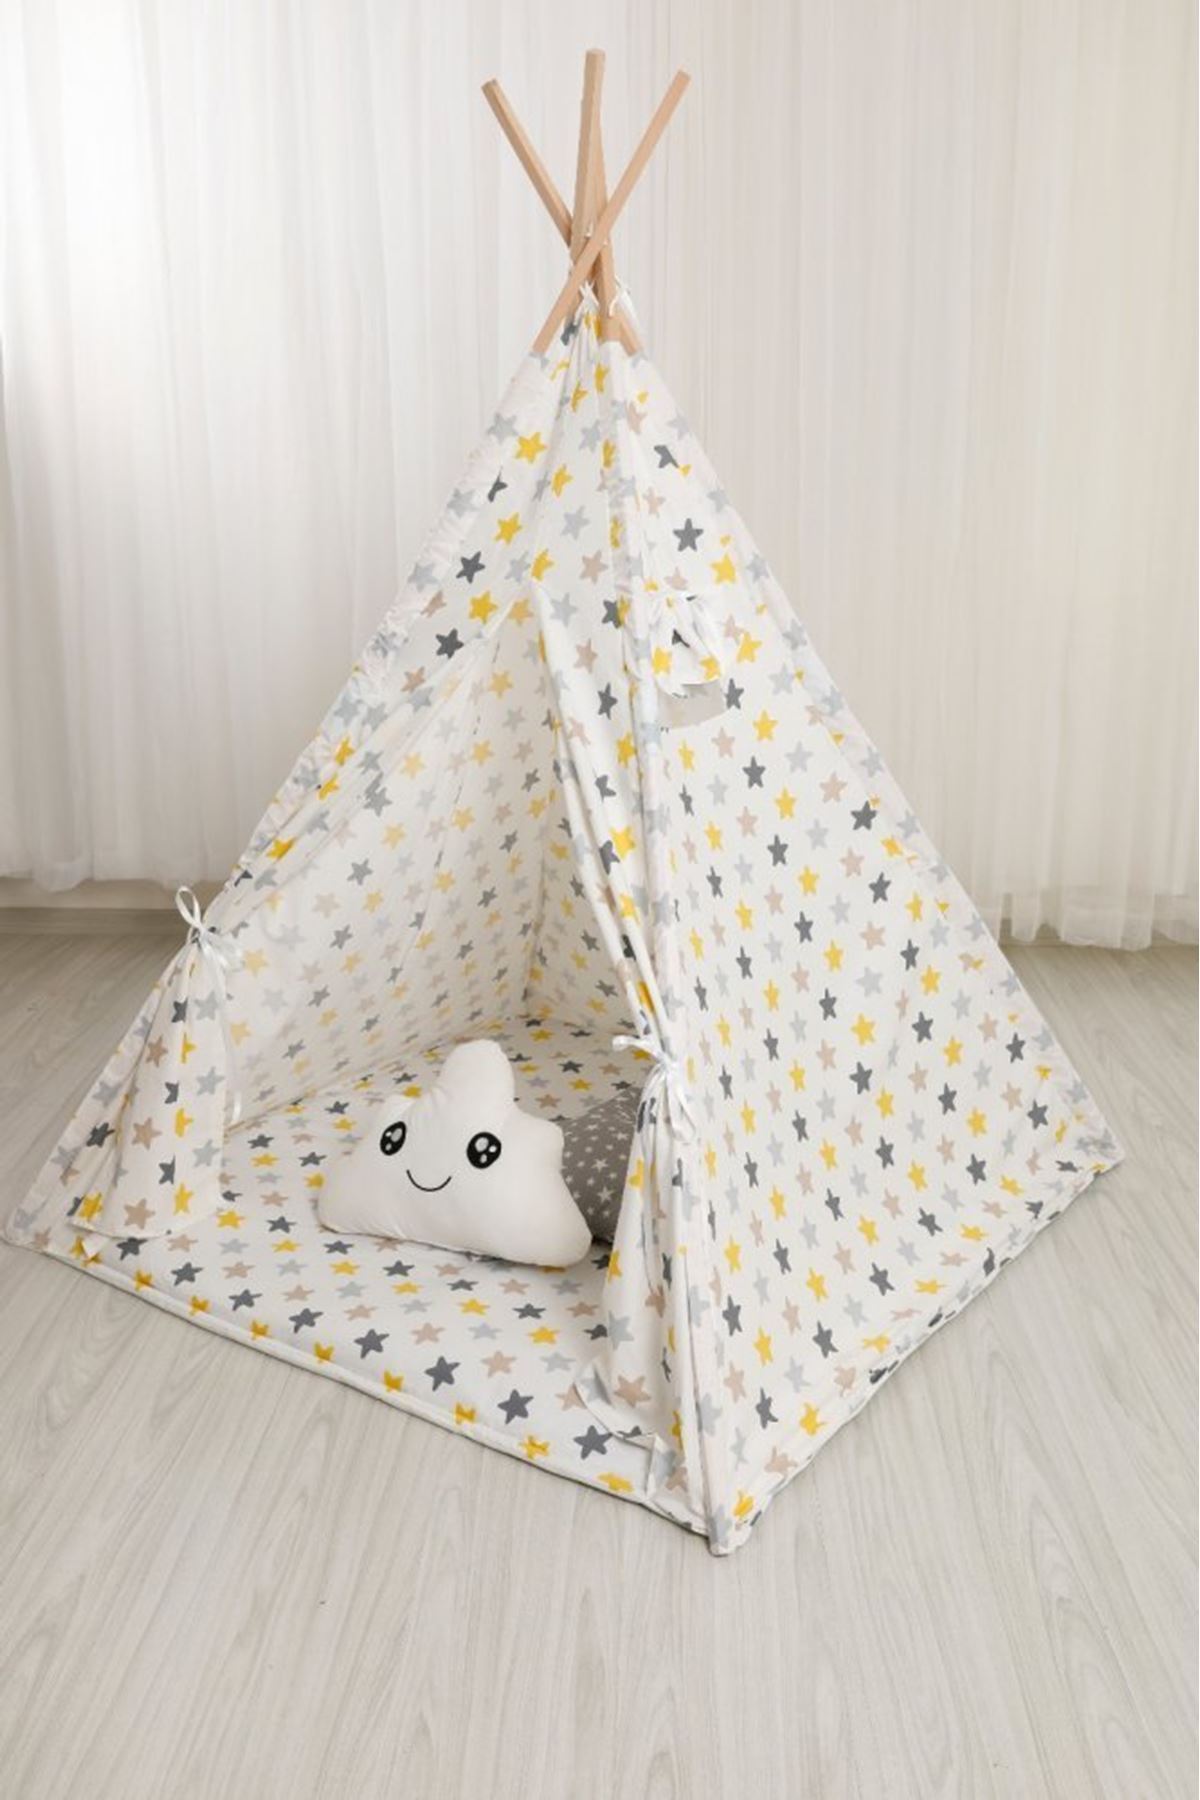 Play Tent "Yellow Star"